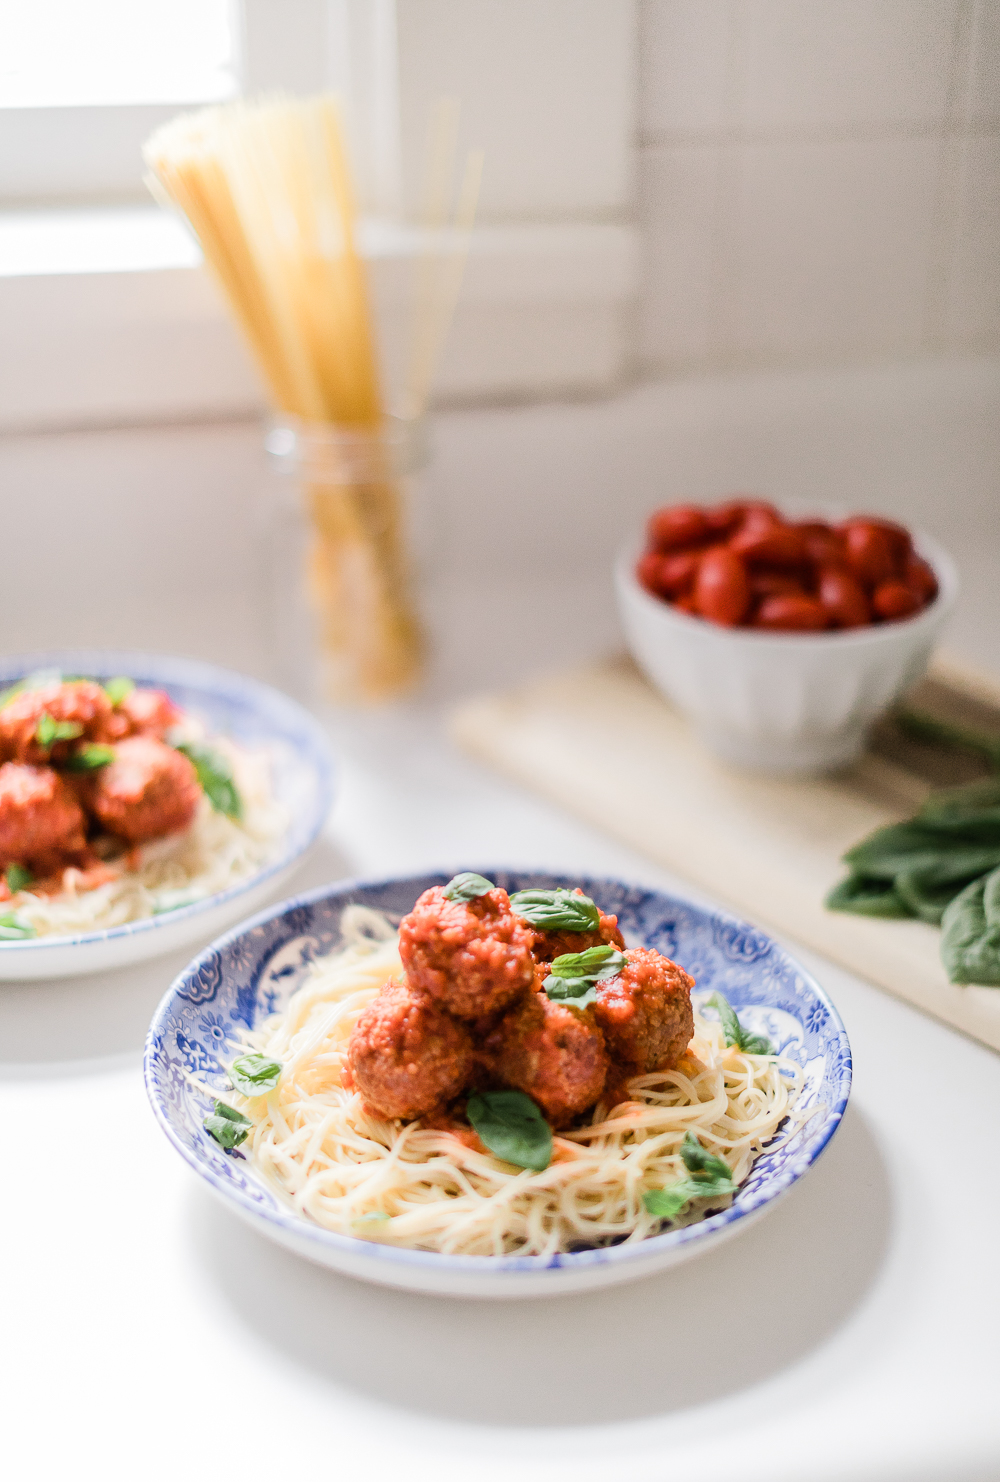 Spaghetti and Pure Farmland Plant-Based Meatballs Recipe by affordable entertaining blogger Stephanie Ziajka from Diary of a Debutante, blue and white Italian tablescape